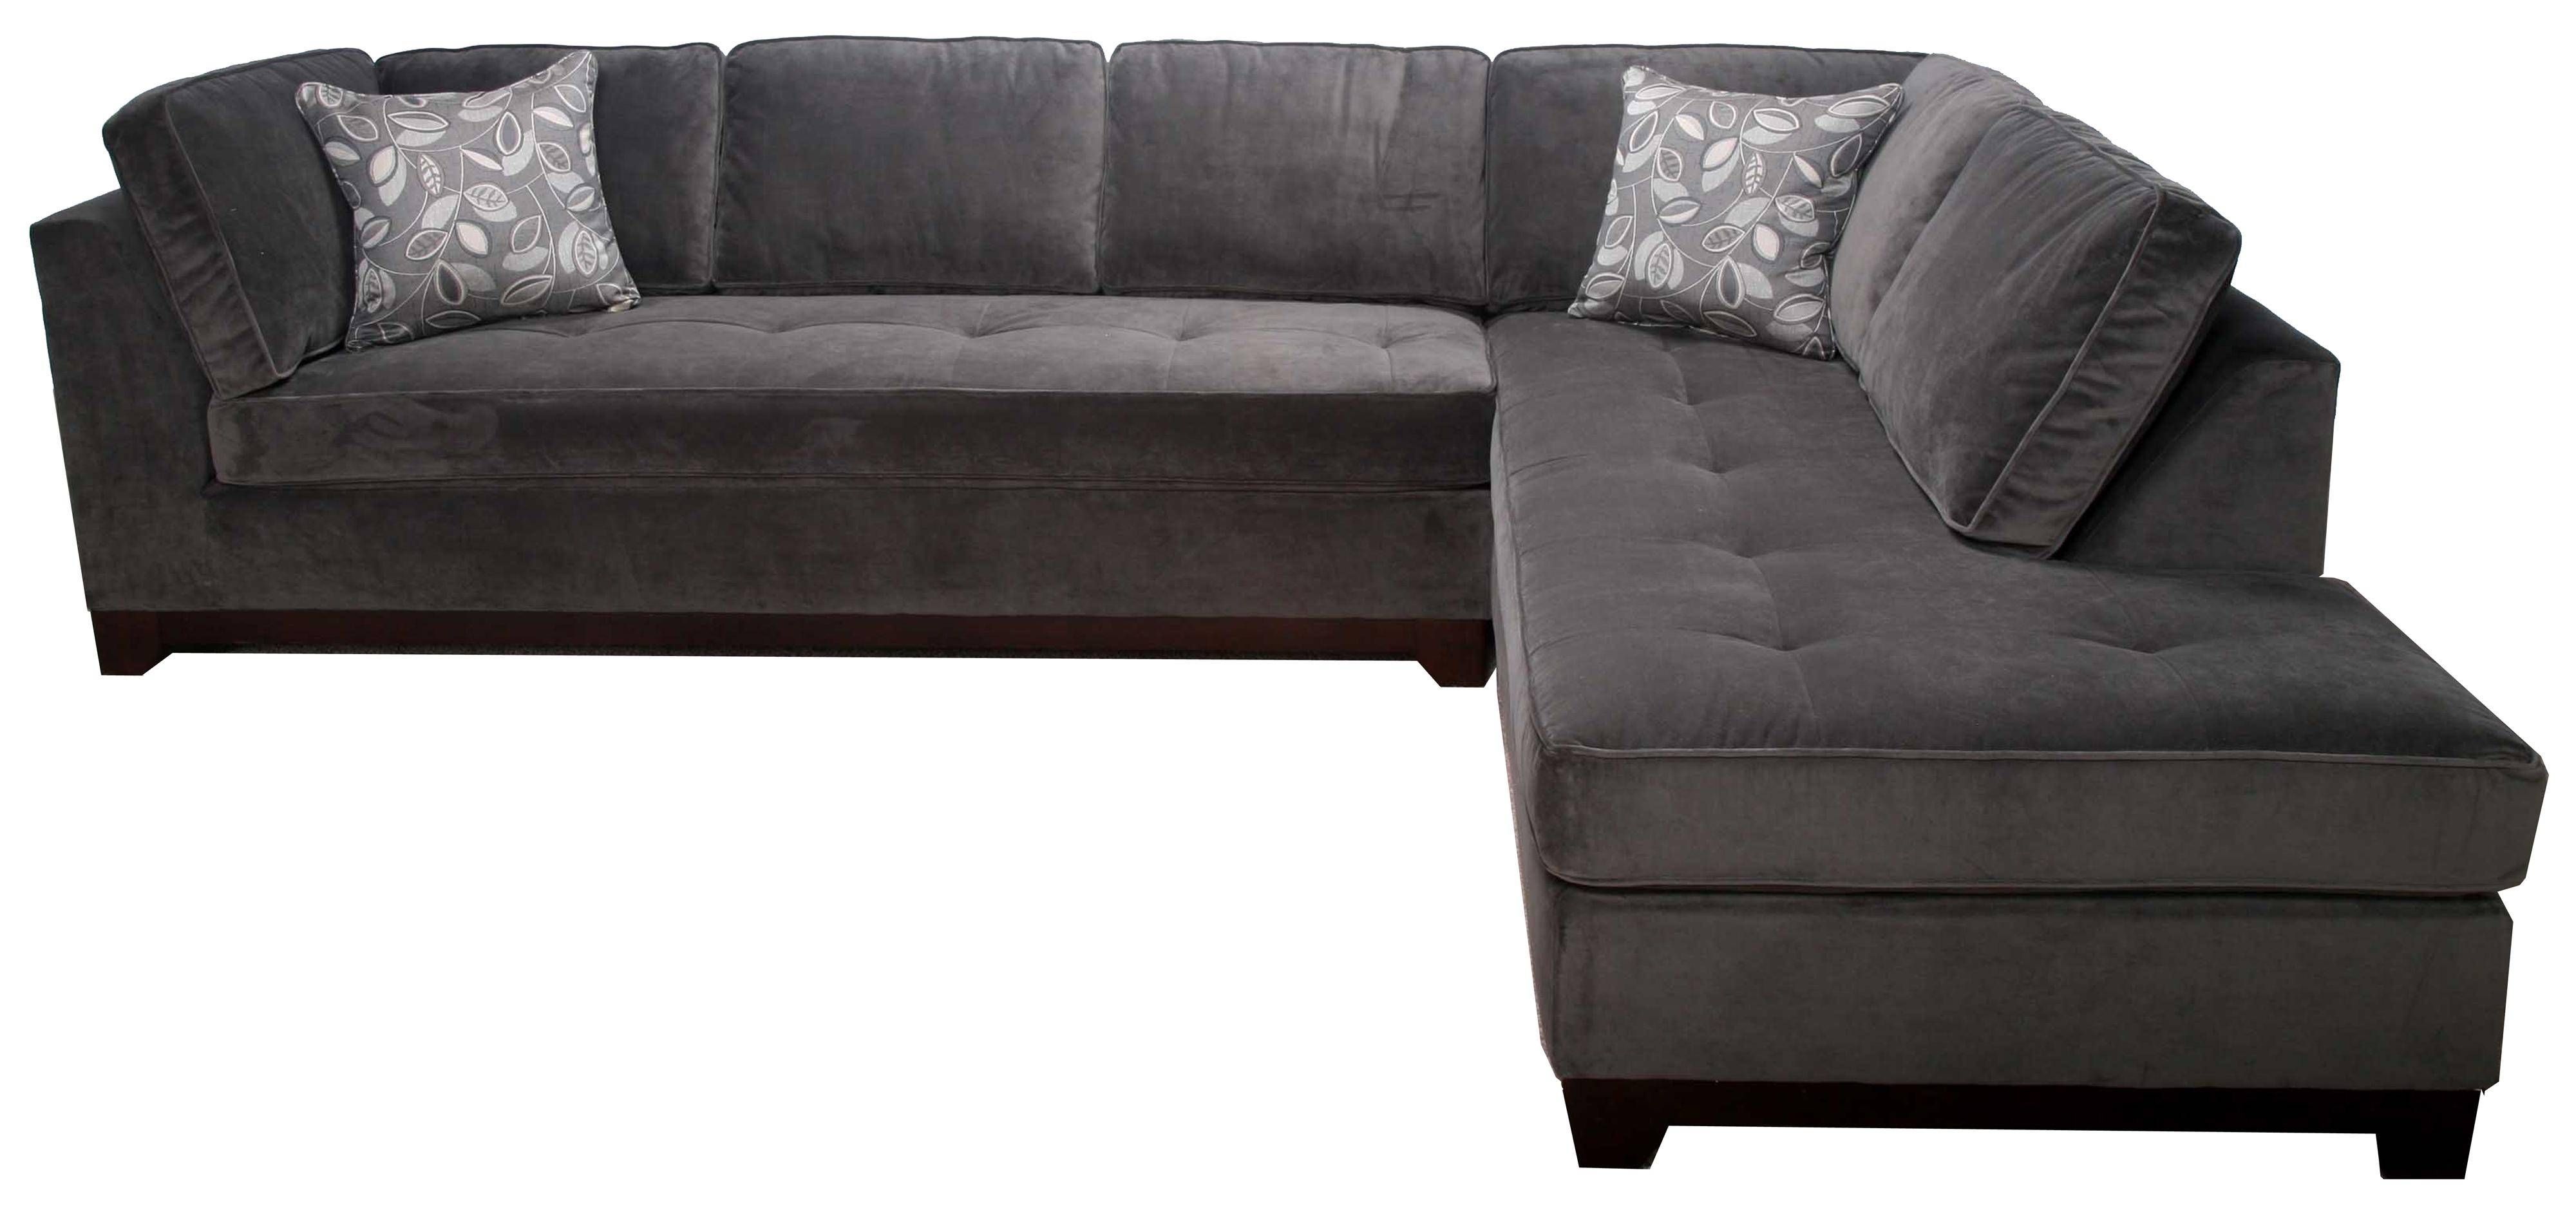 Bauhaus 536a Contemporary 2 Piece Sectional With Chaise – Ahfa Pertaining To Bauhaus Sectional Sofas (Photo 3 of 30)